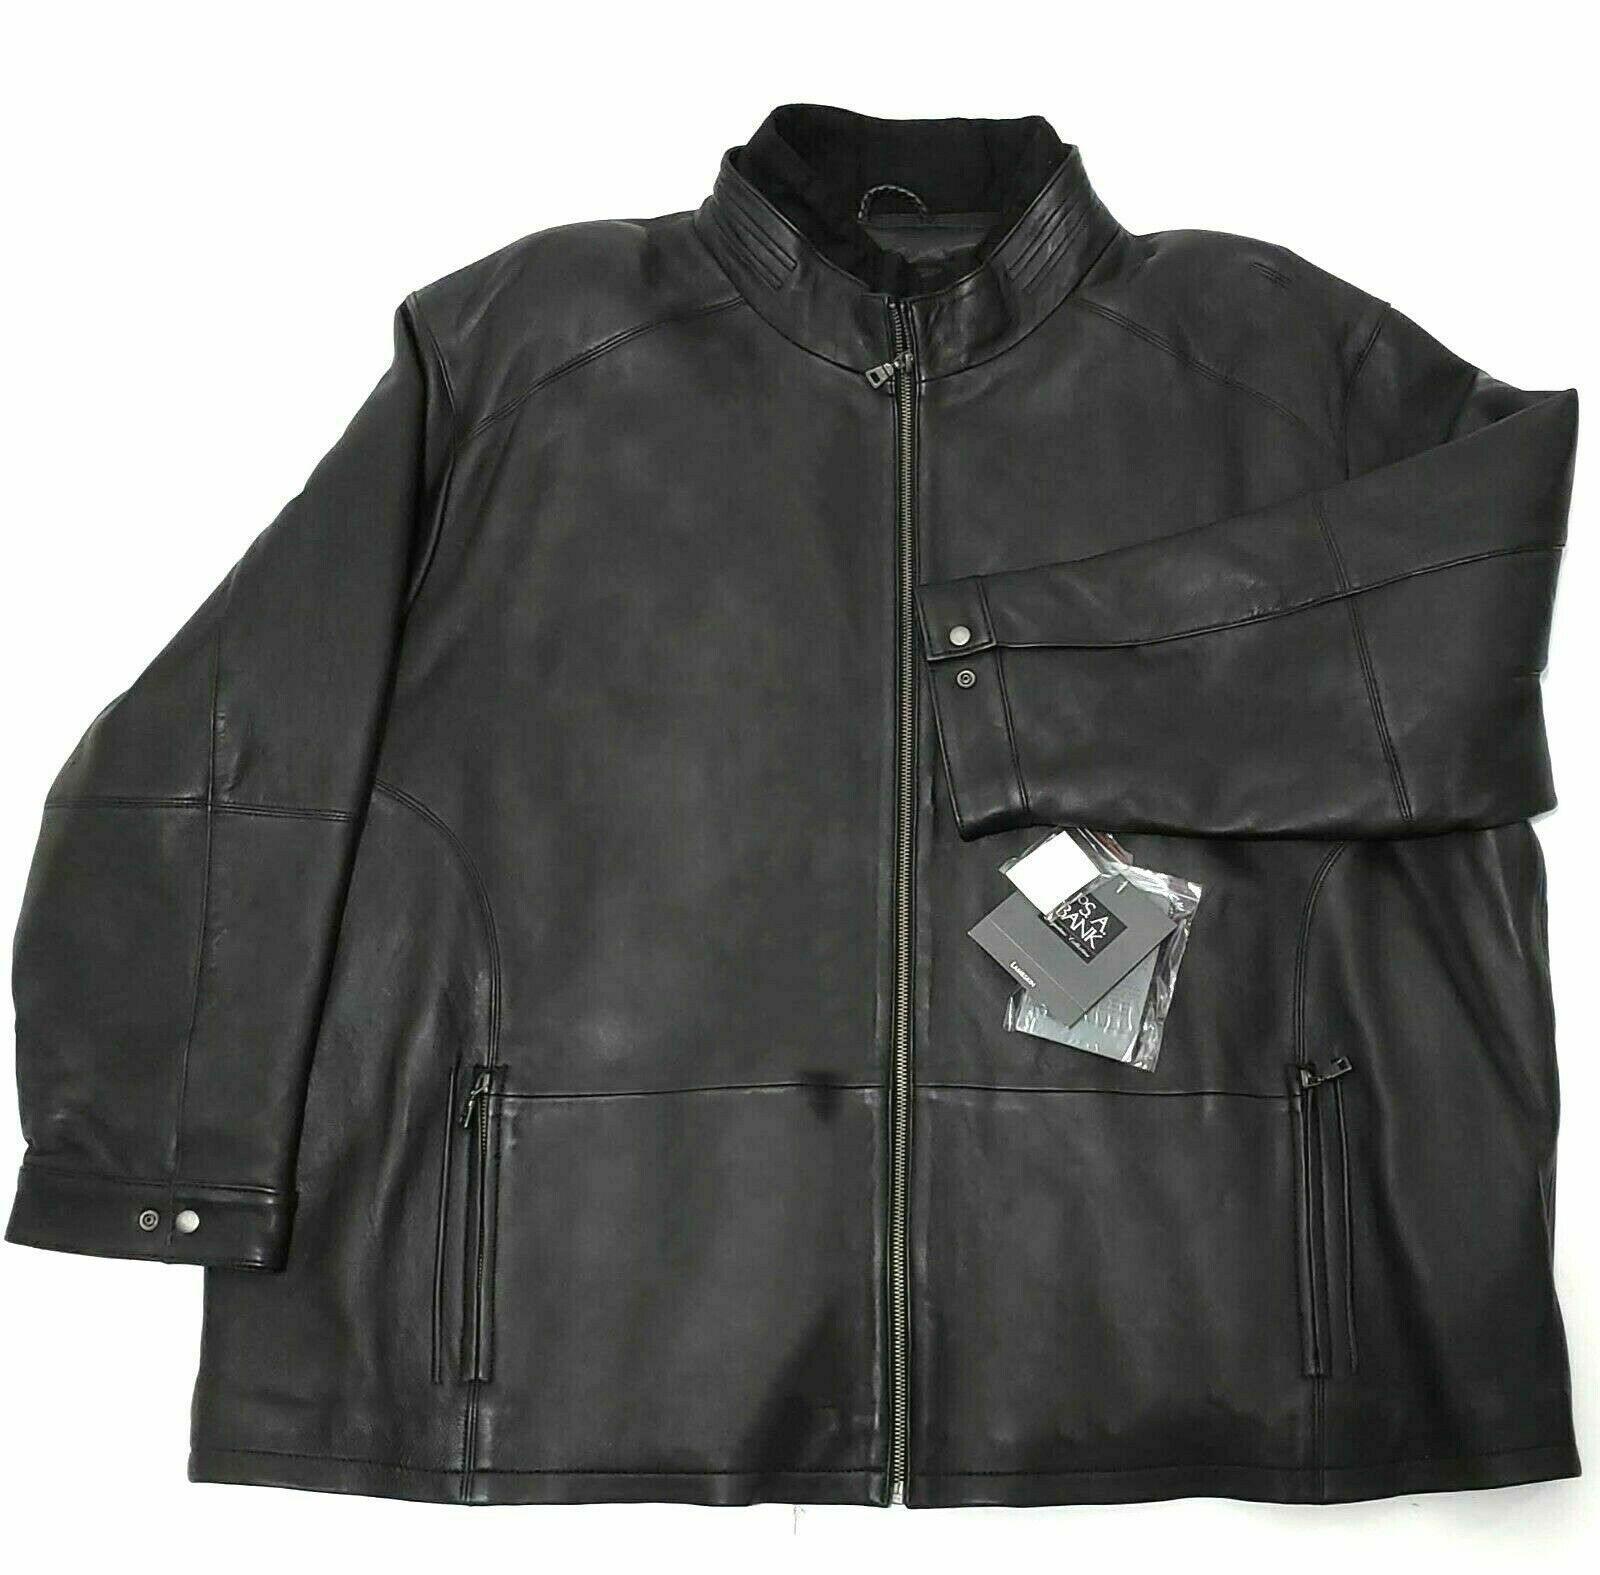 JOS.A.BANK Signature Collection Mens Winter Lamb Leather Jacket Big Size 3XB - SVNYFancy